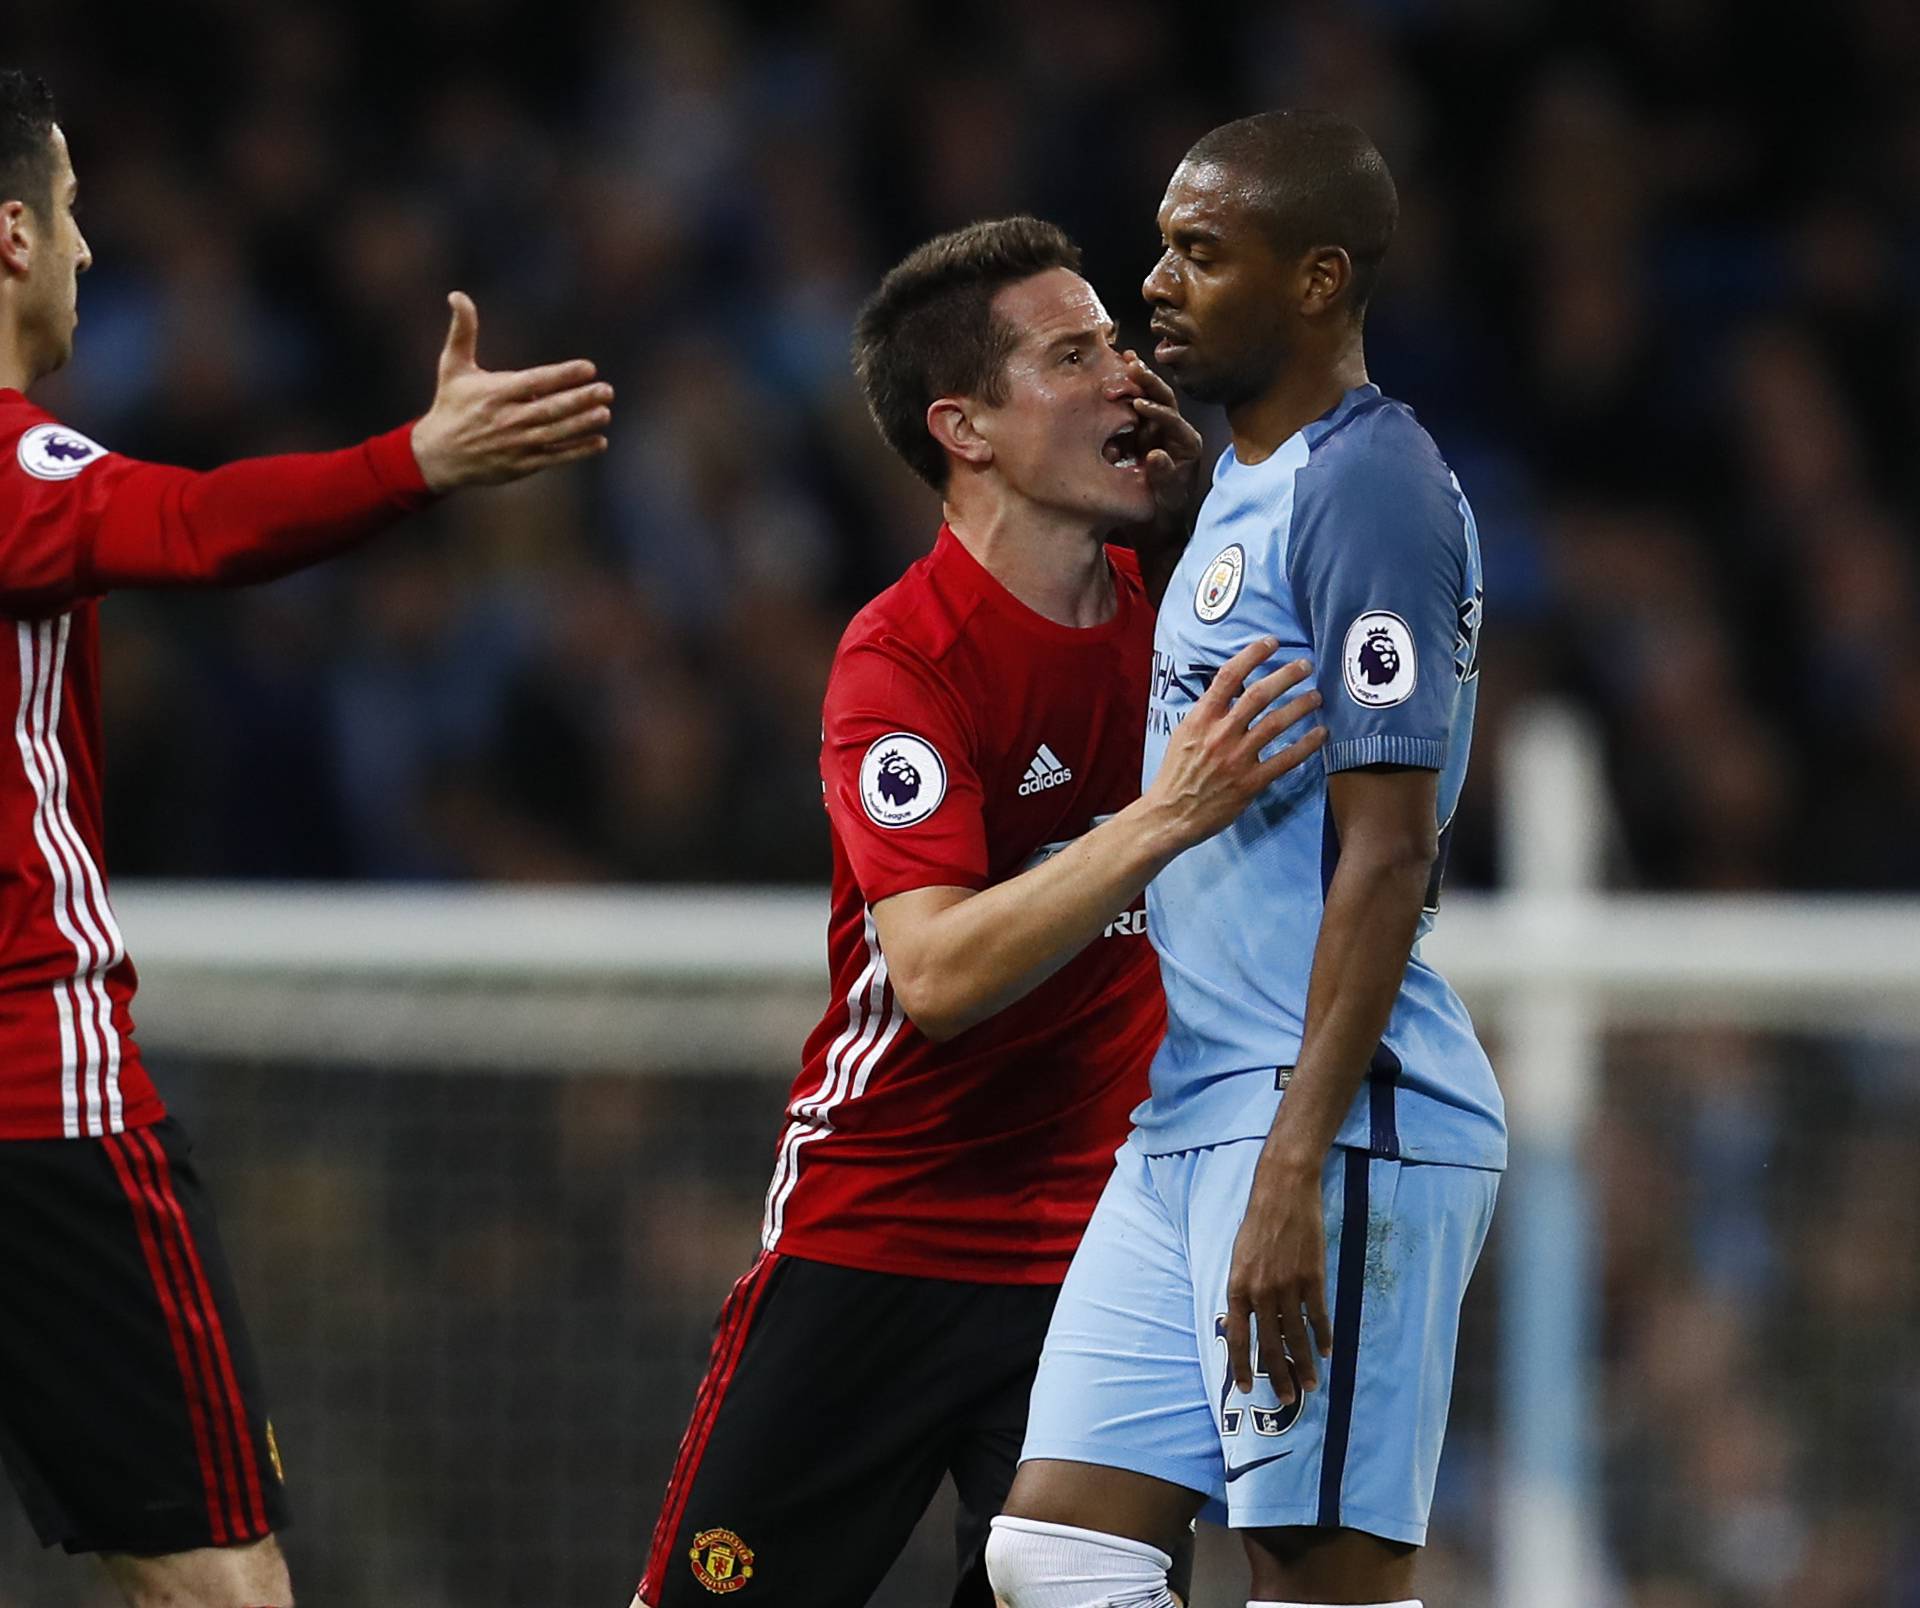 Manchester City's Fernandinho clashes with Manchester United's Ander Herrera